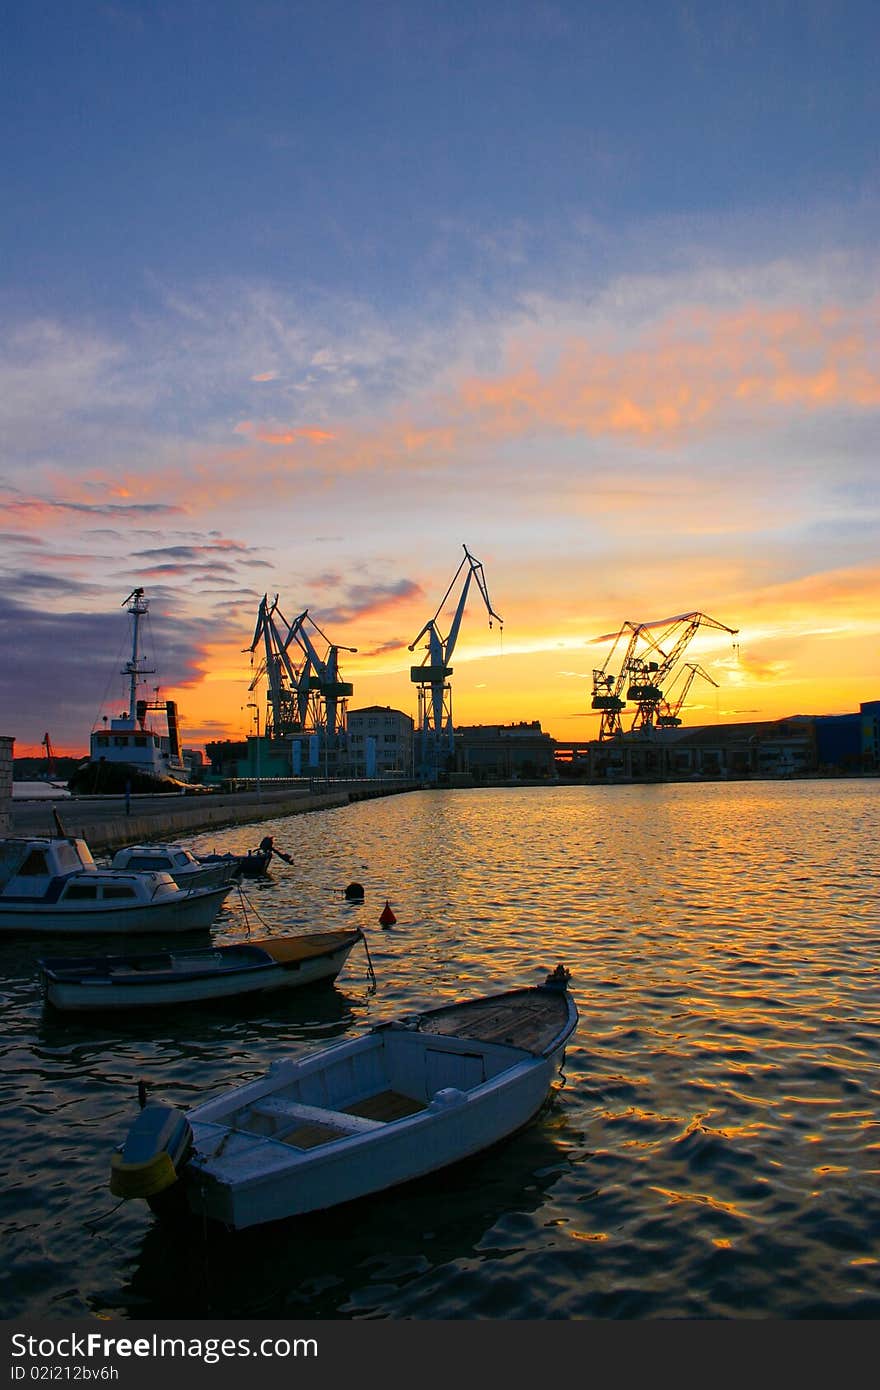 Harbor with cranes and boats at sunset. Harbor with cranes and boats at sunset